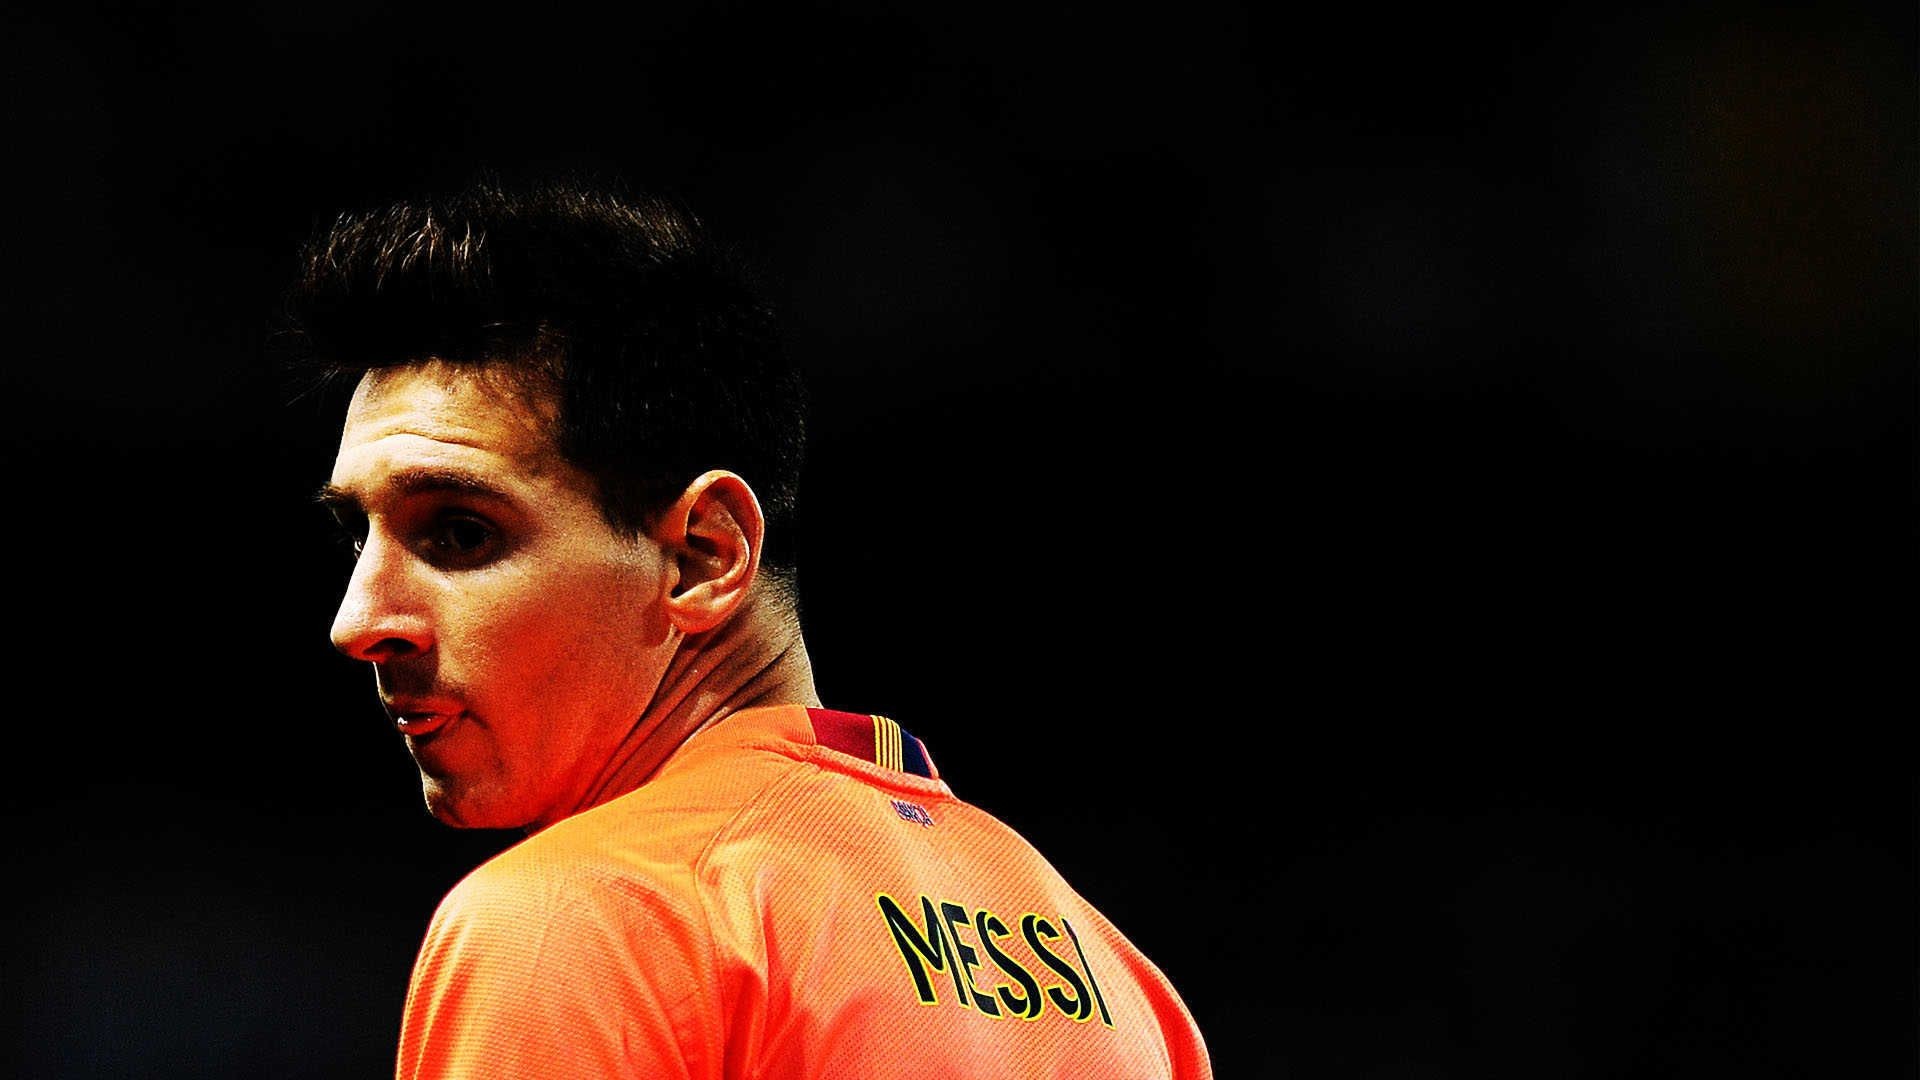 1920x1080 Lionel Messi HD wallpapers free download